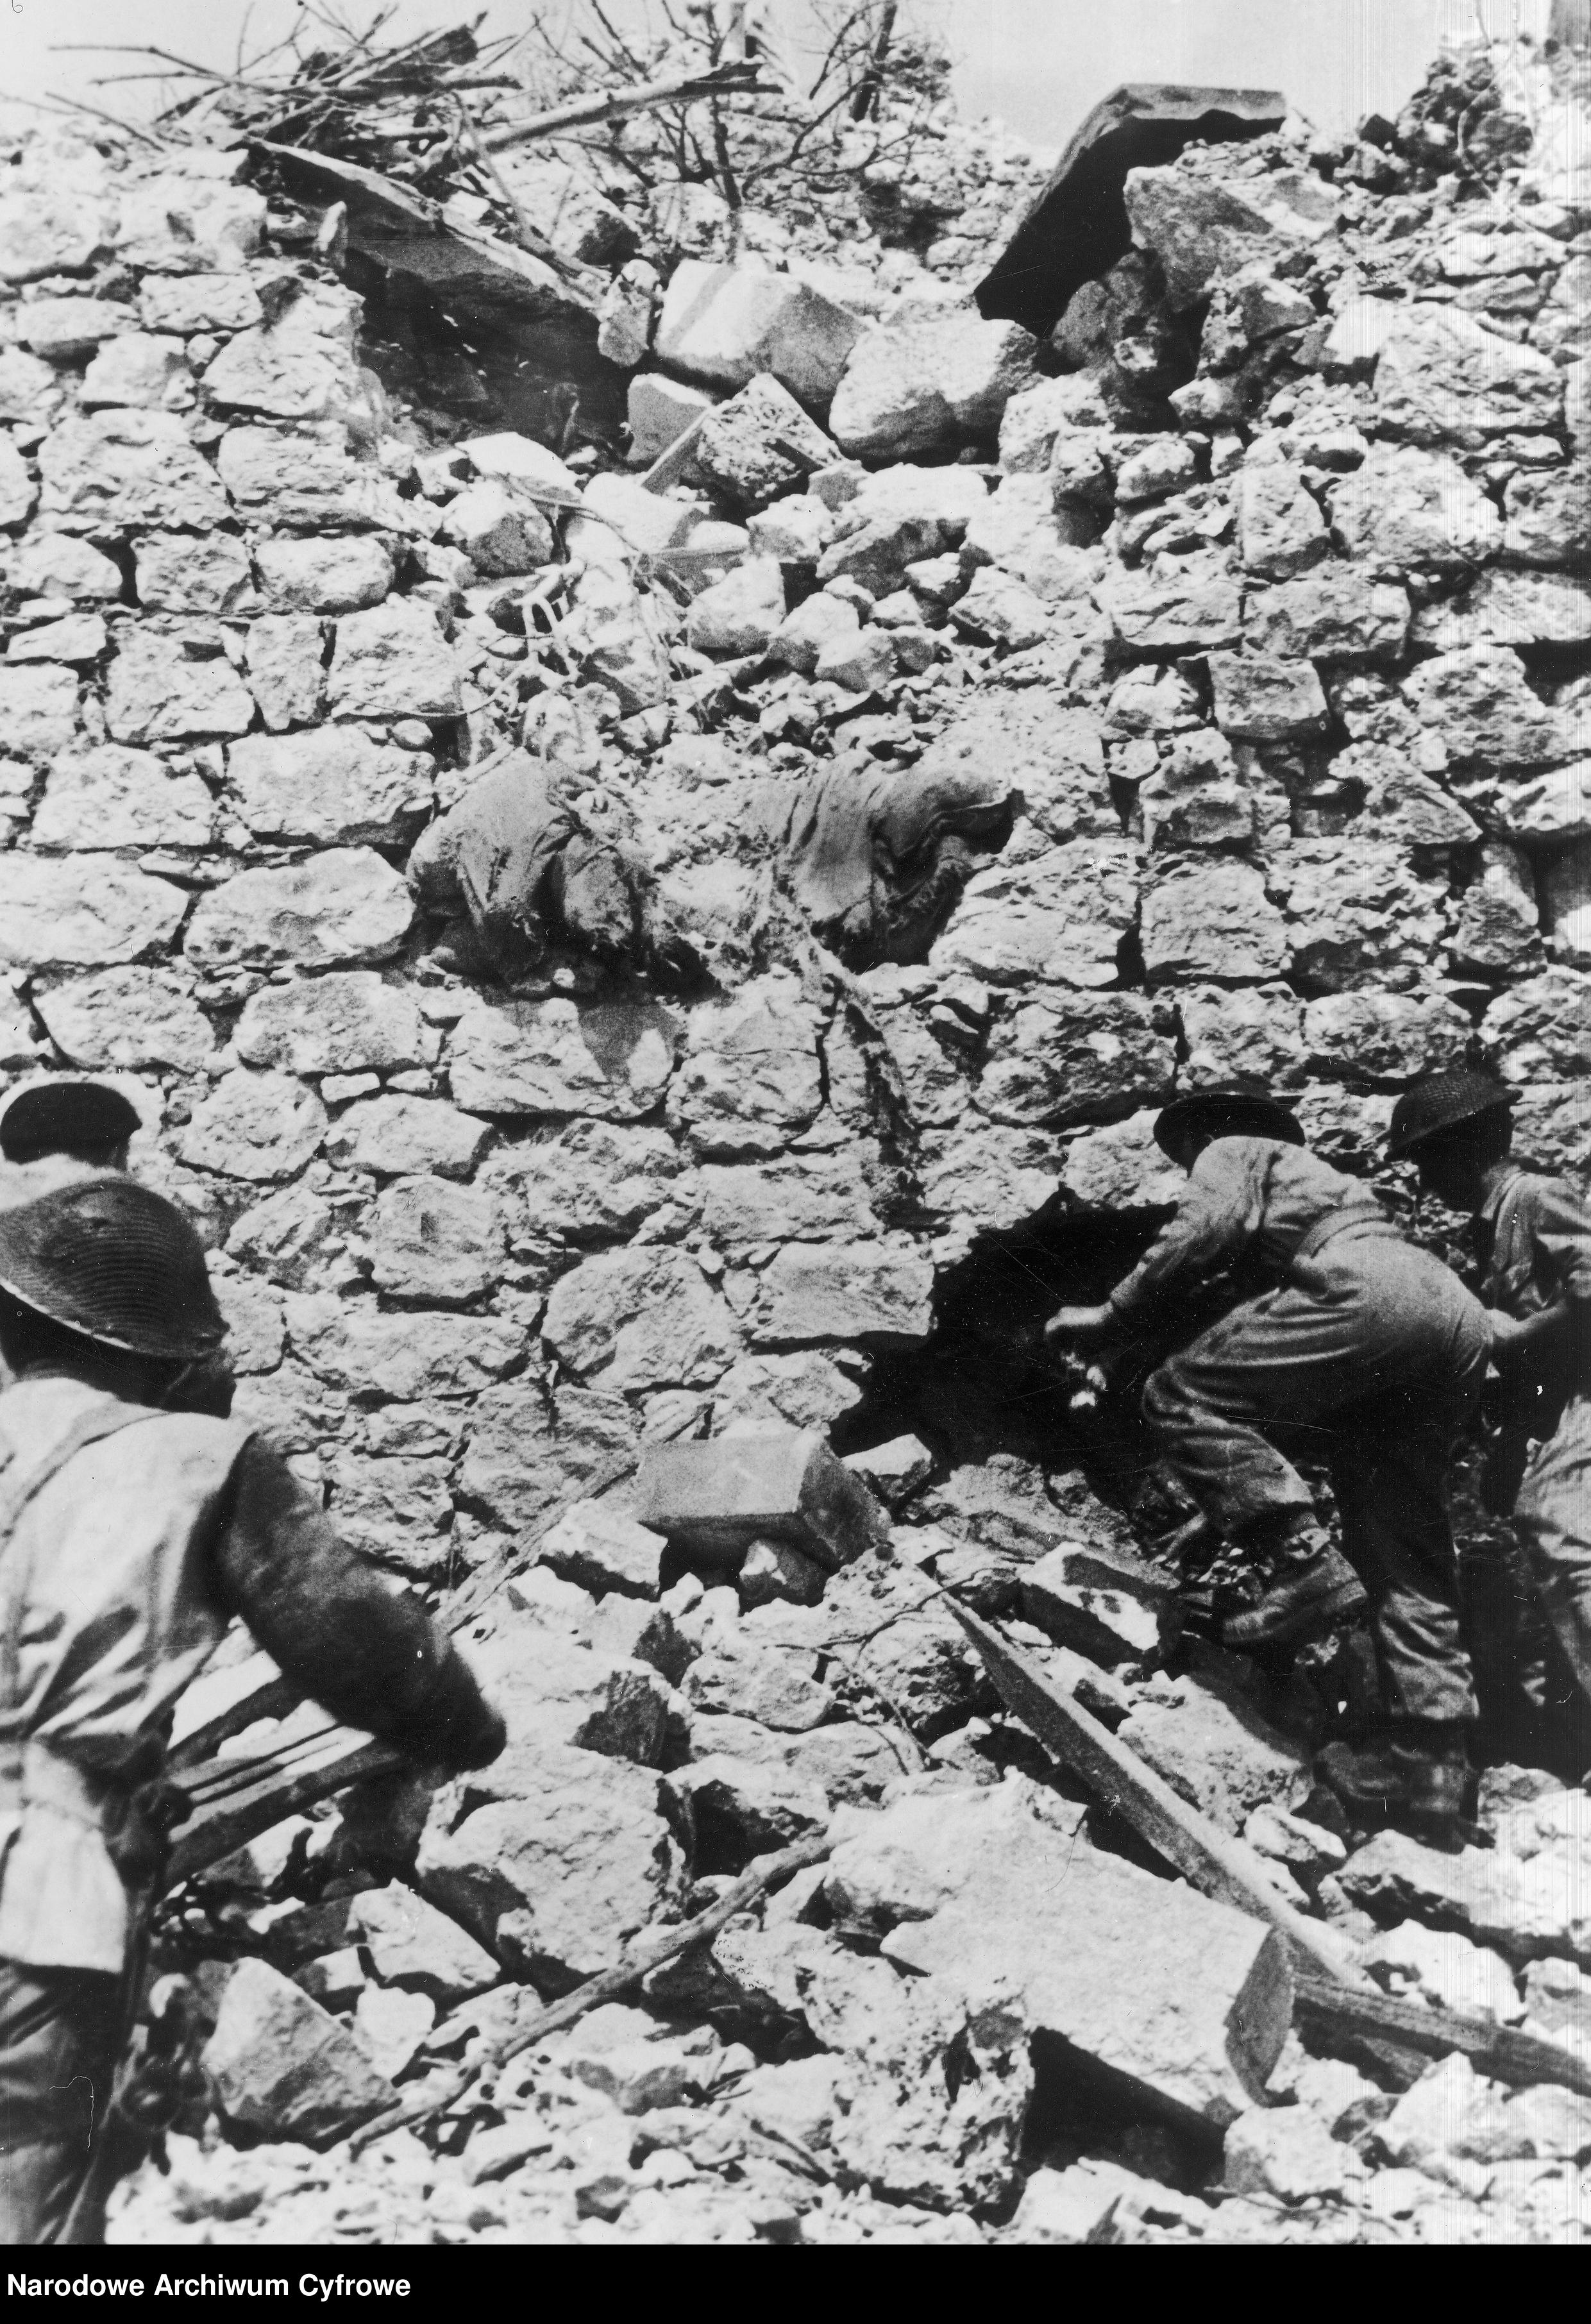 <p class='eng'>1944/05<br />The soldiers of the Independent 2nd Armored Brigade penetrate the German bunker.<br />NAC 3/24/0/-/457/6</p>